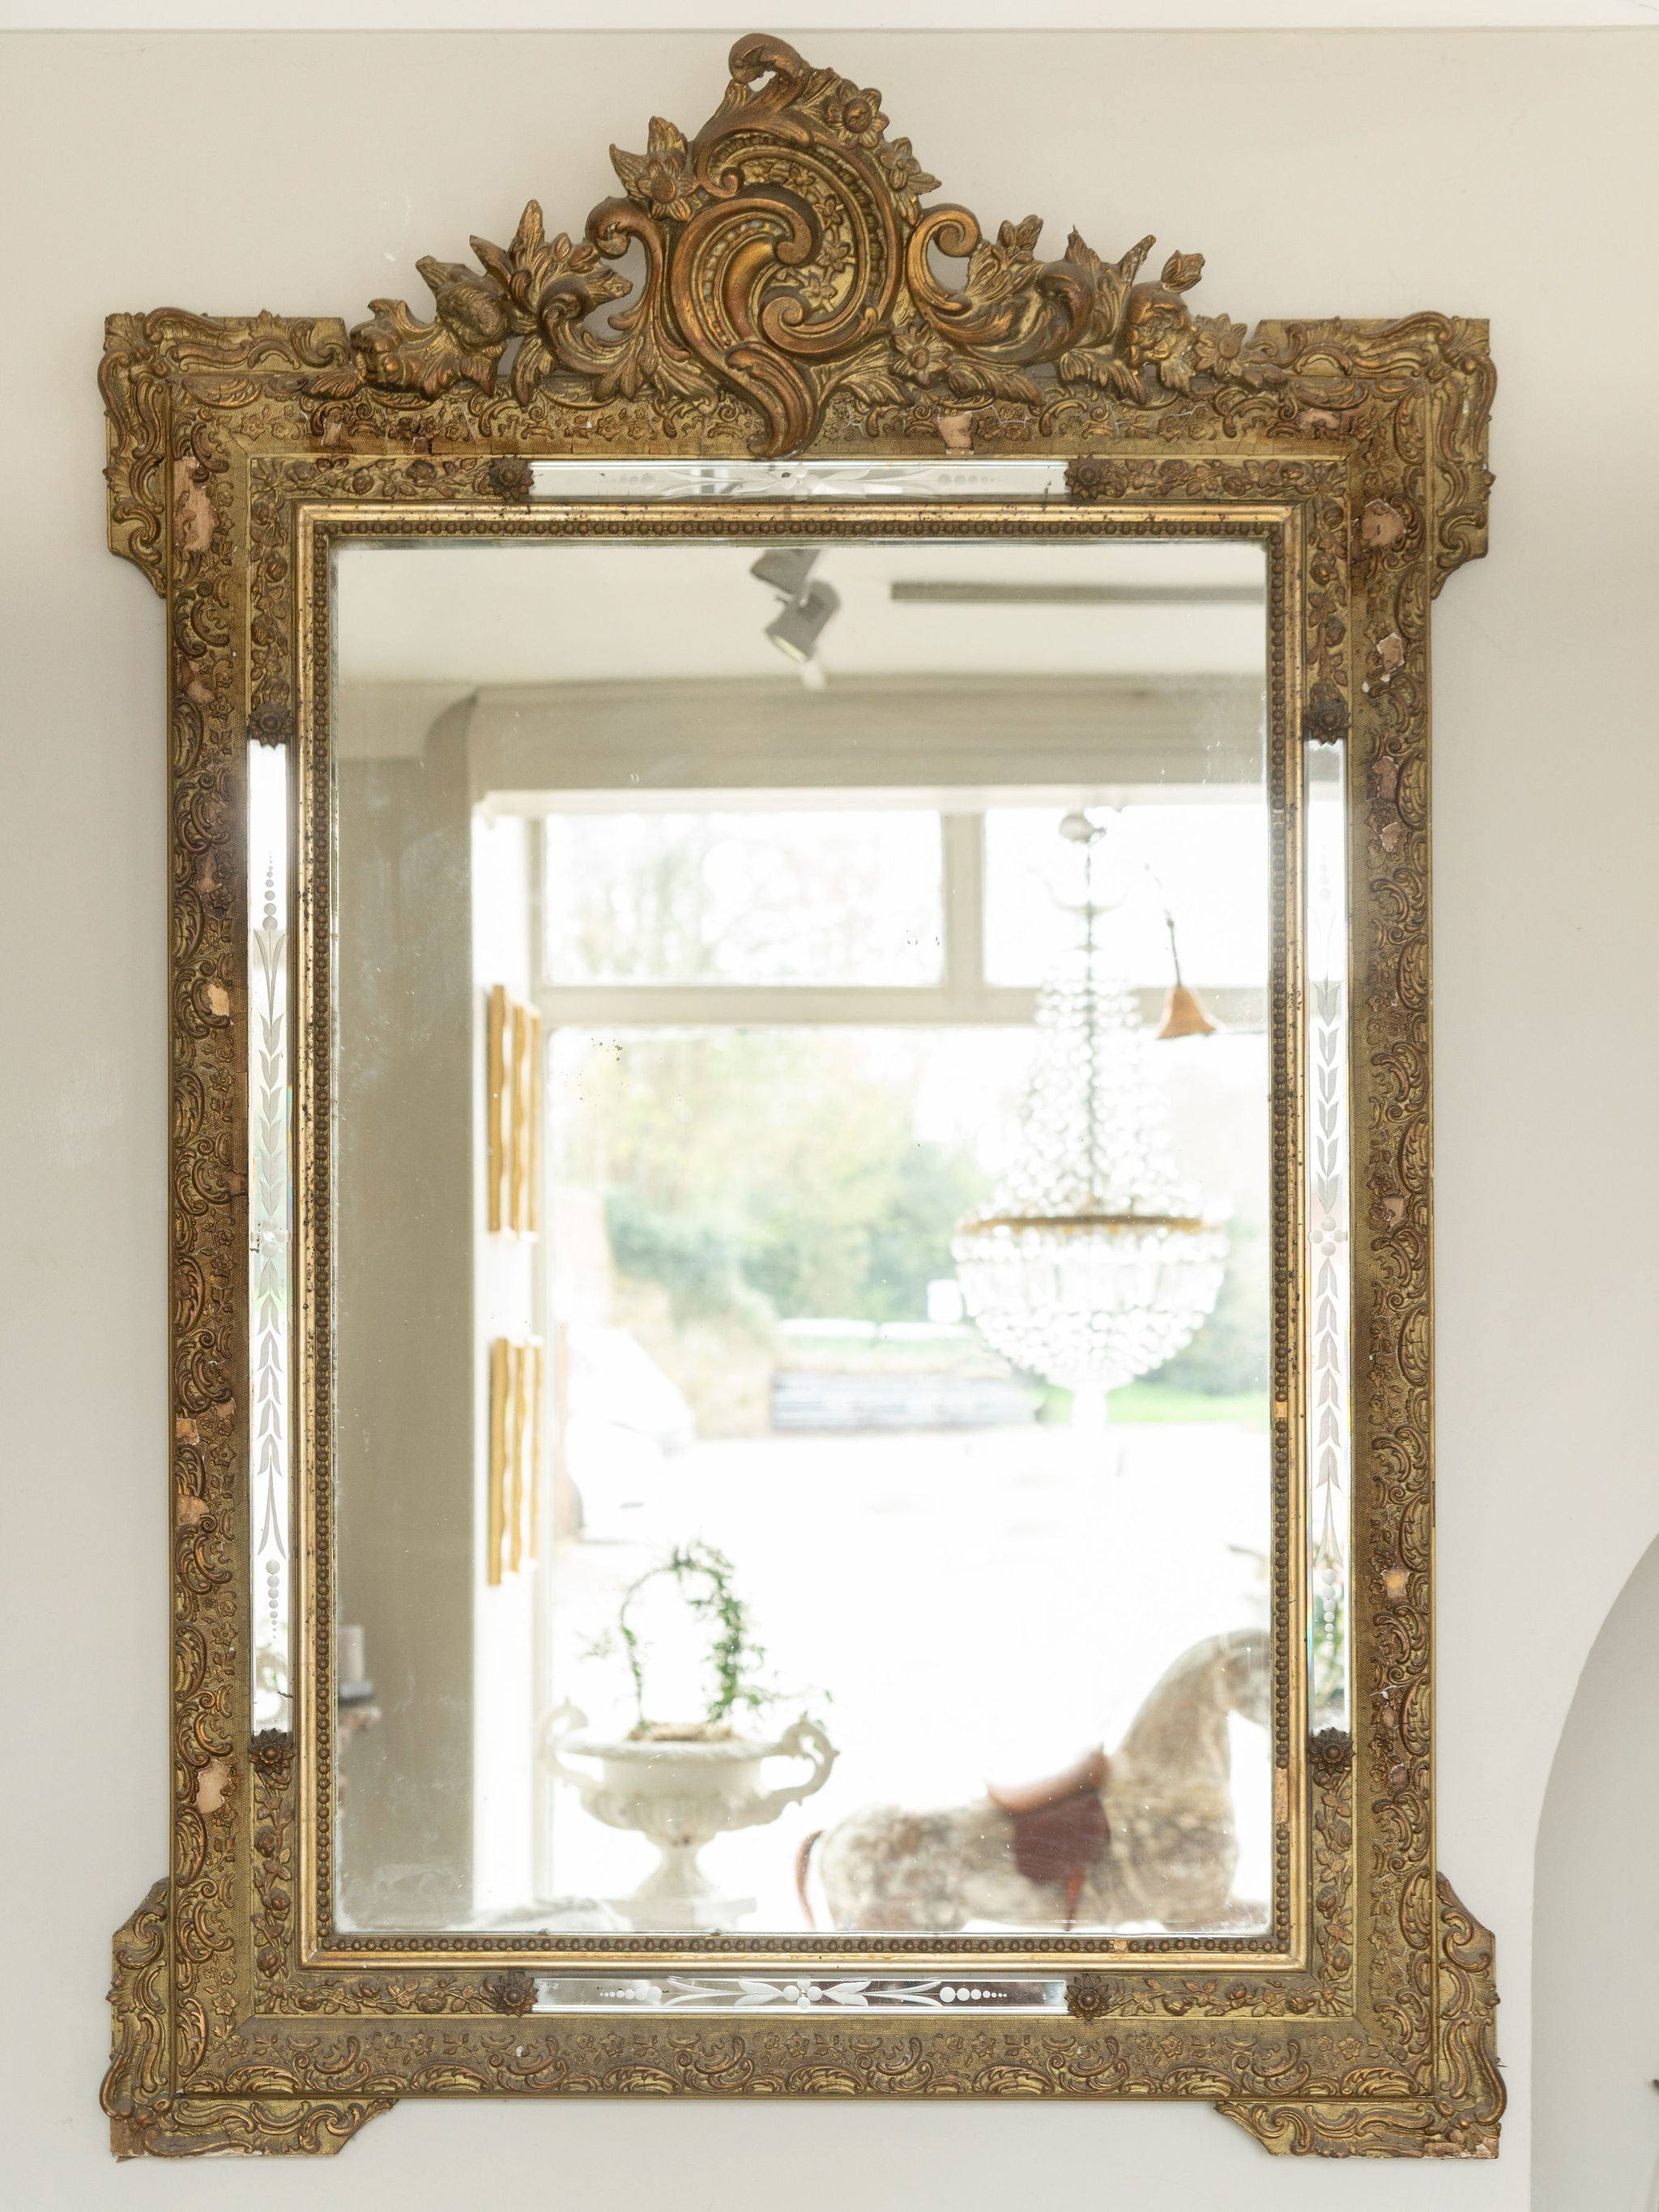 French 19th Century Gold Gilt Louis Philippe Mirror with Crest